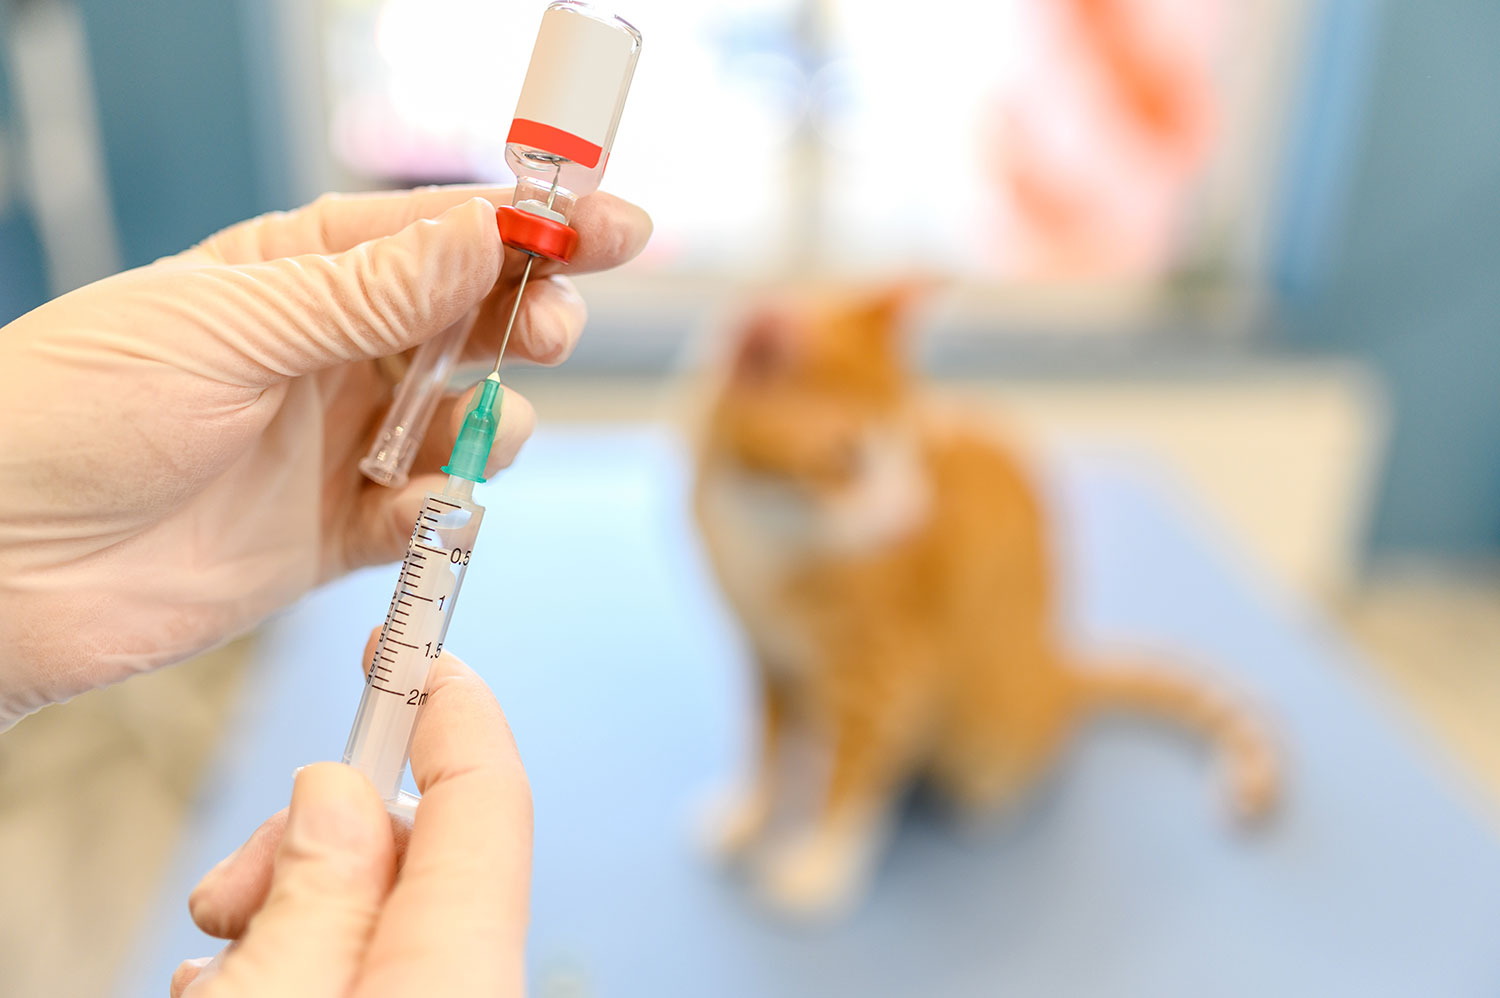 https://www.aaha.org/globalassets/05-pet-health-resources/your-pet/new-articles/syringe-drawing-vaccine.jpg